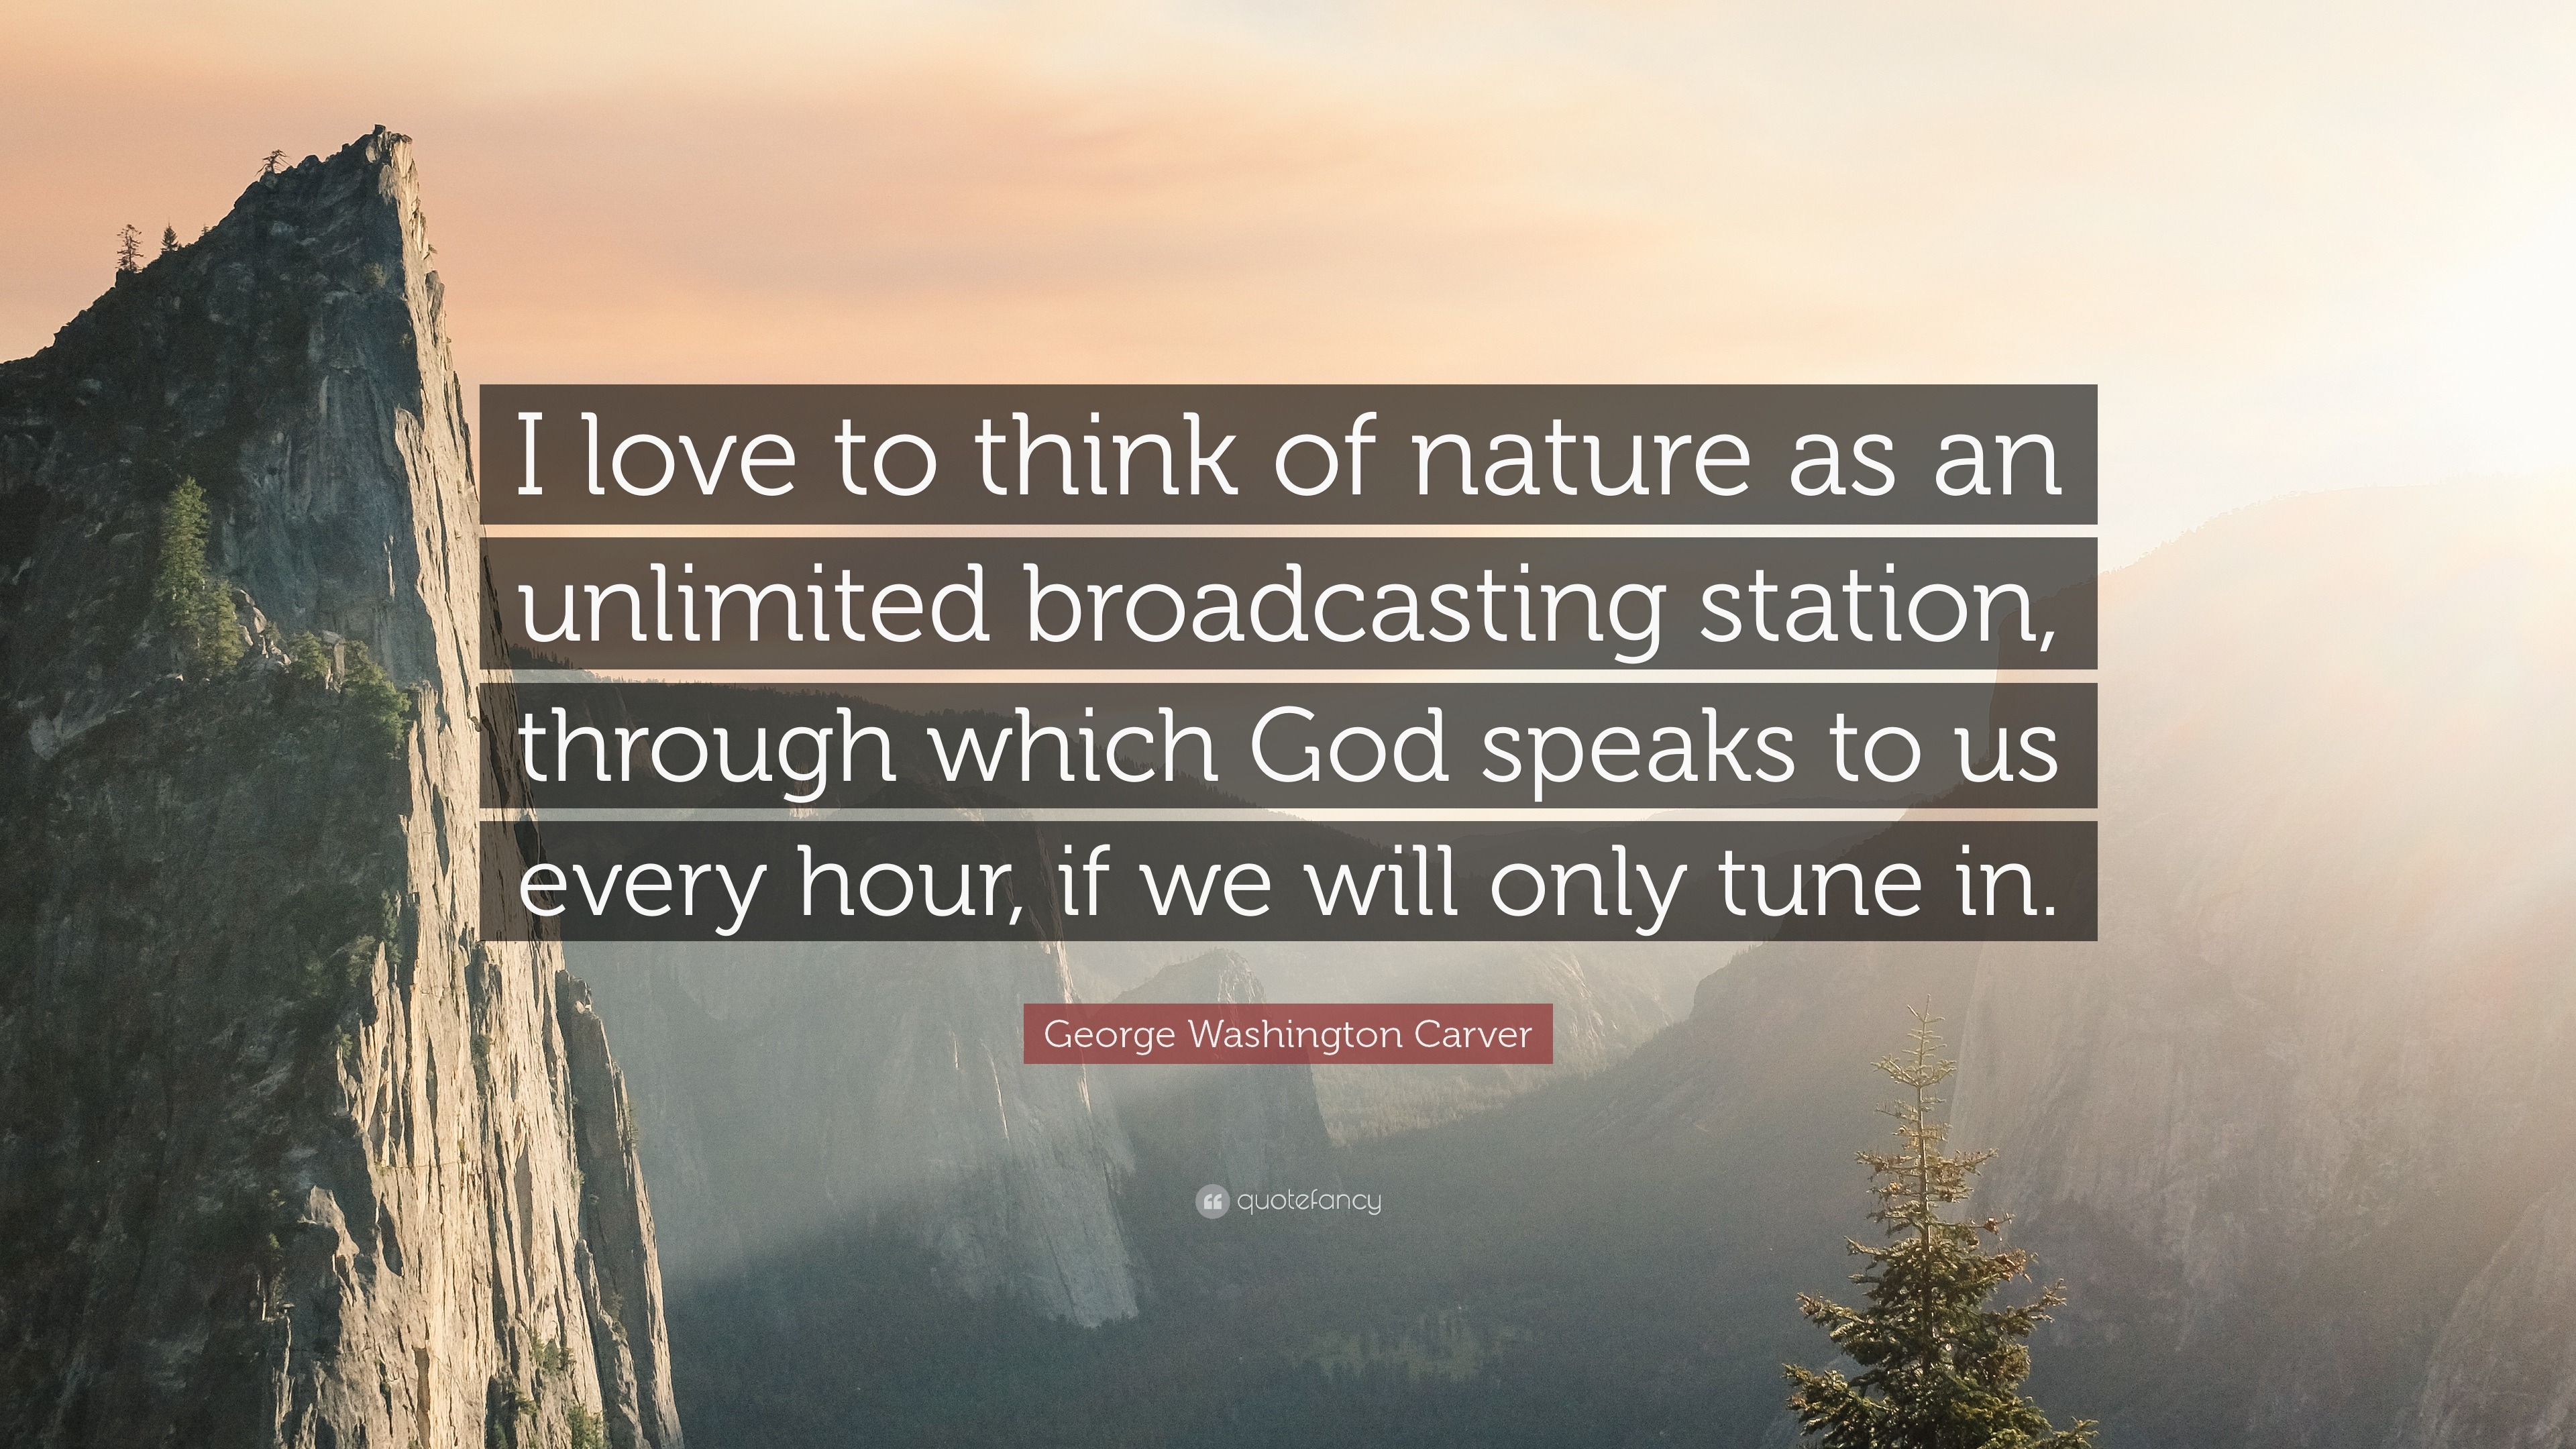 48680 George Washington Carver Quote I love to think of nature as an